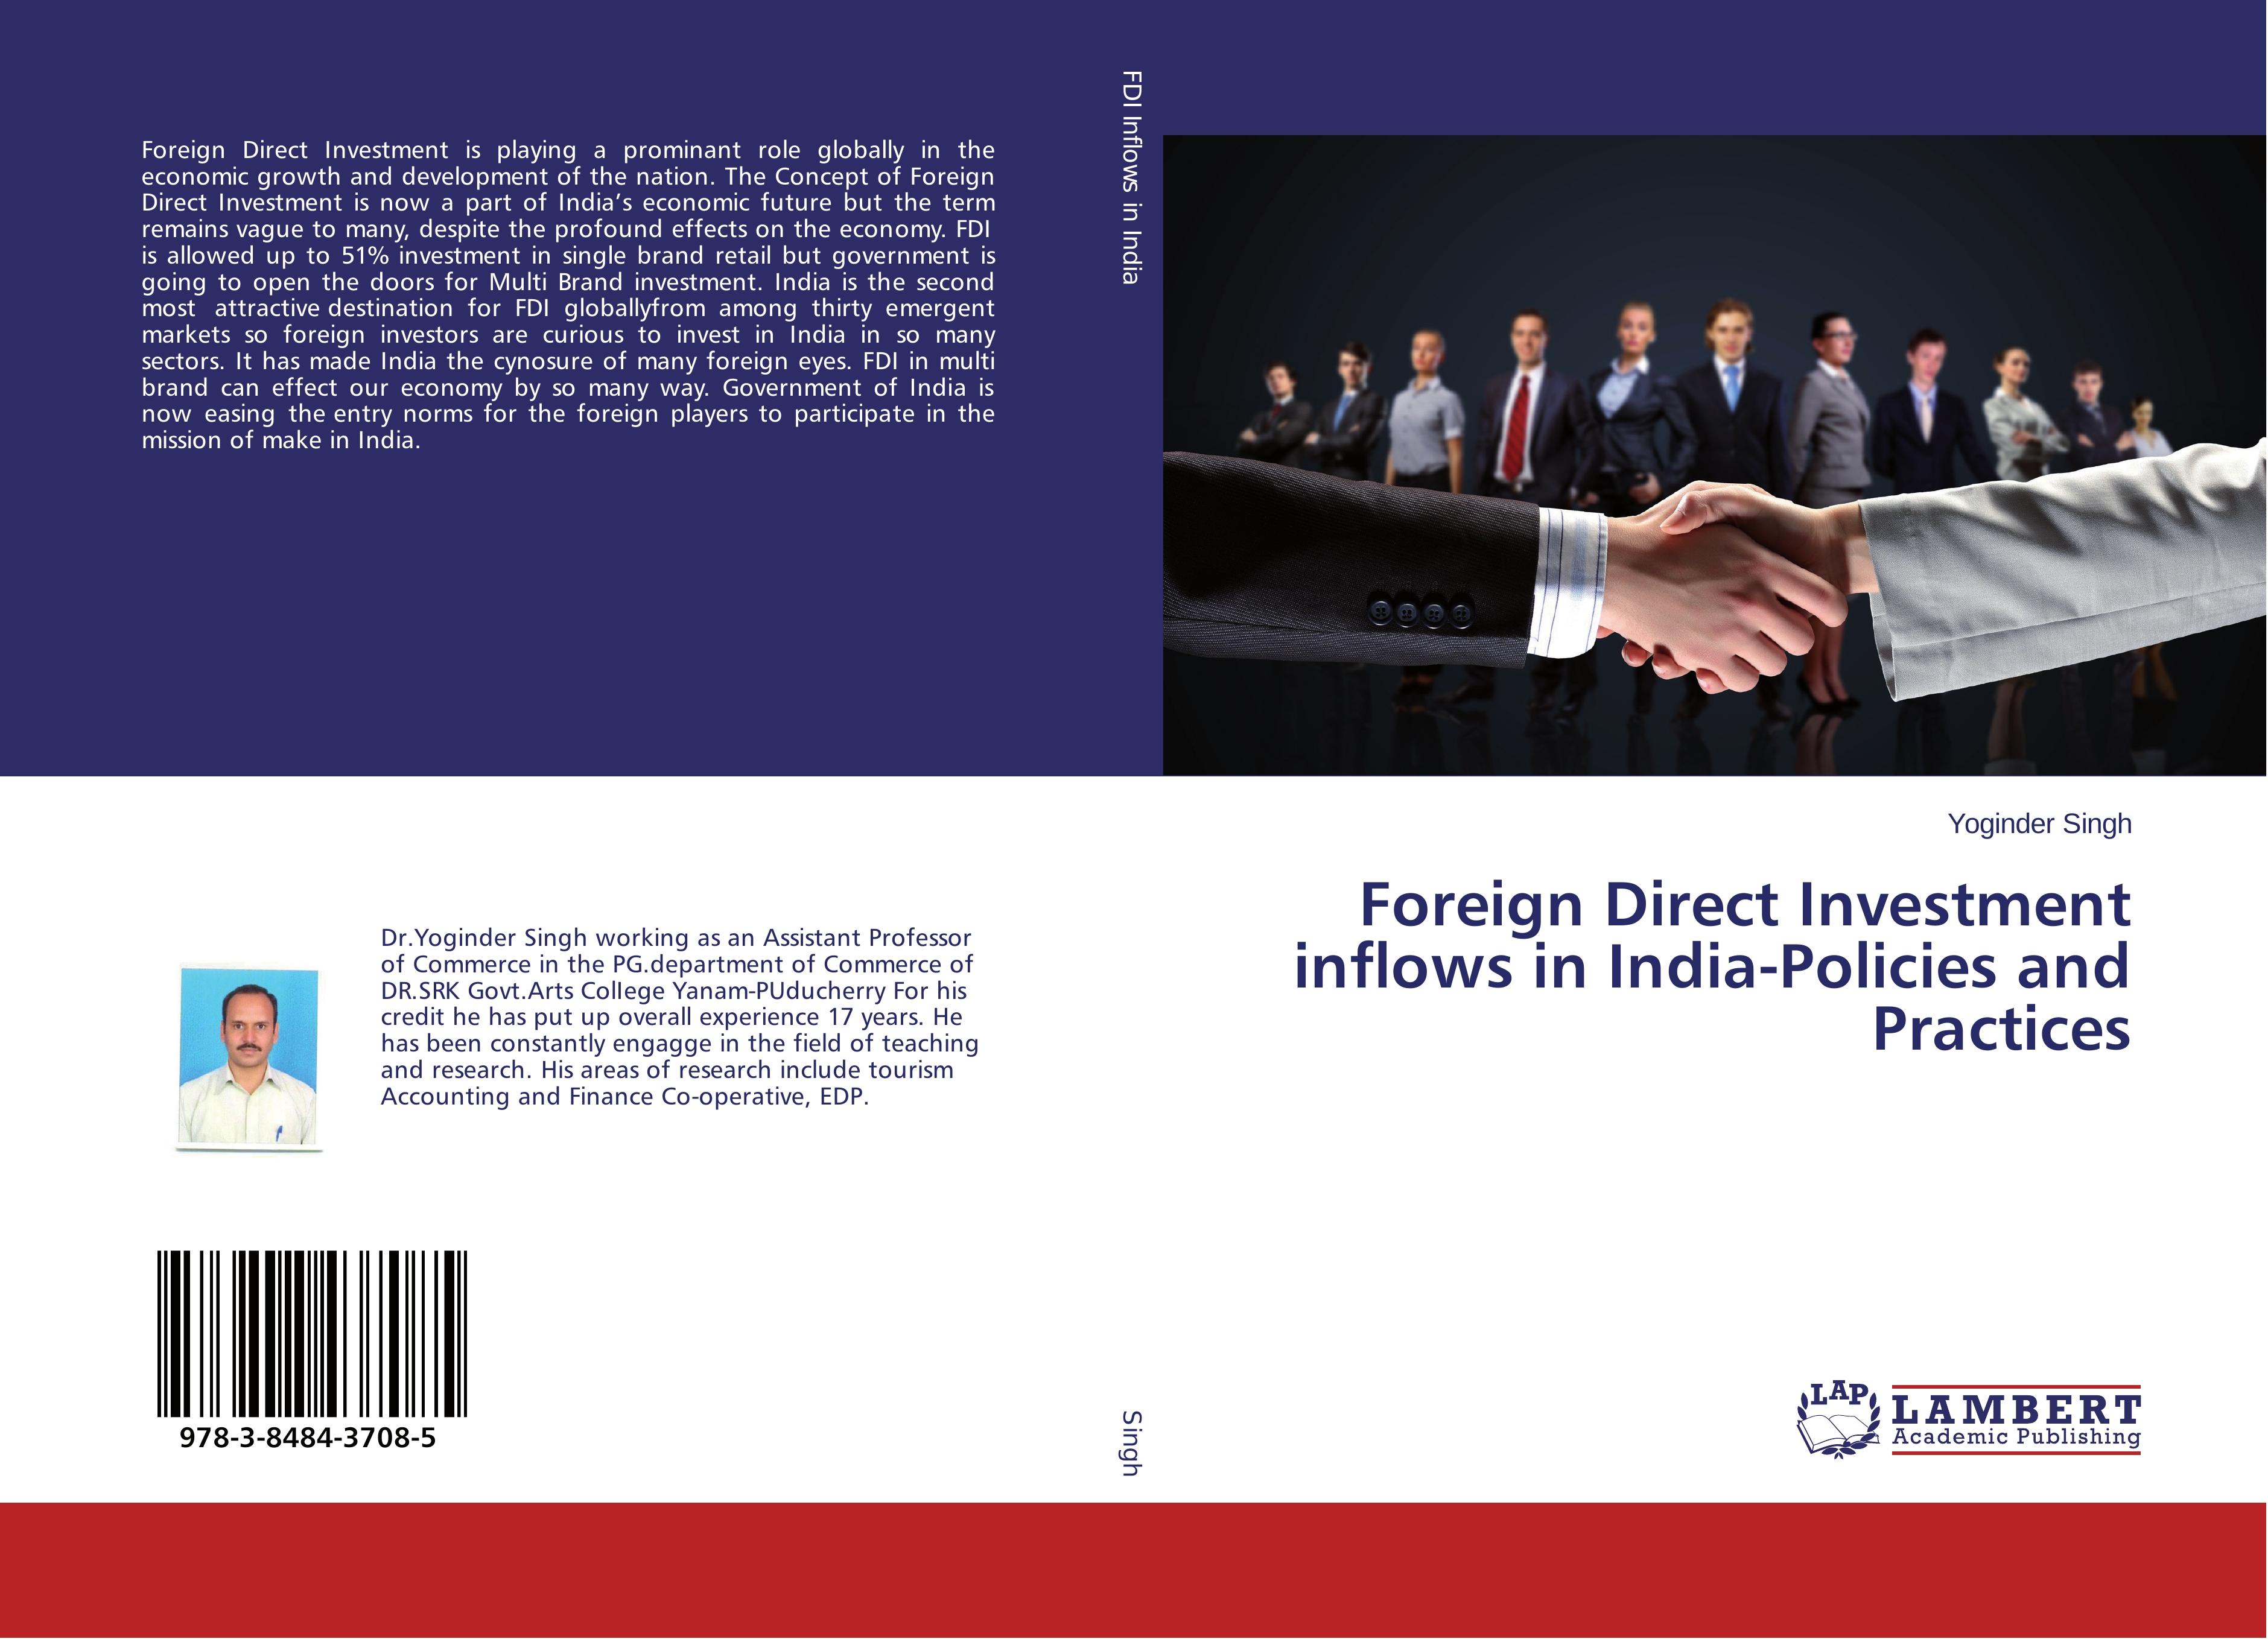 Foreign Direct Investment inflows in India-Policies and Practices - Yoginder Singh